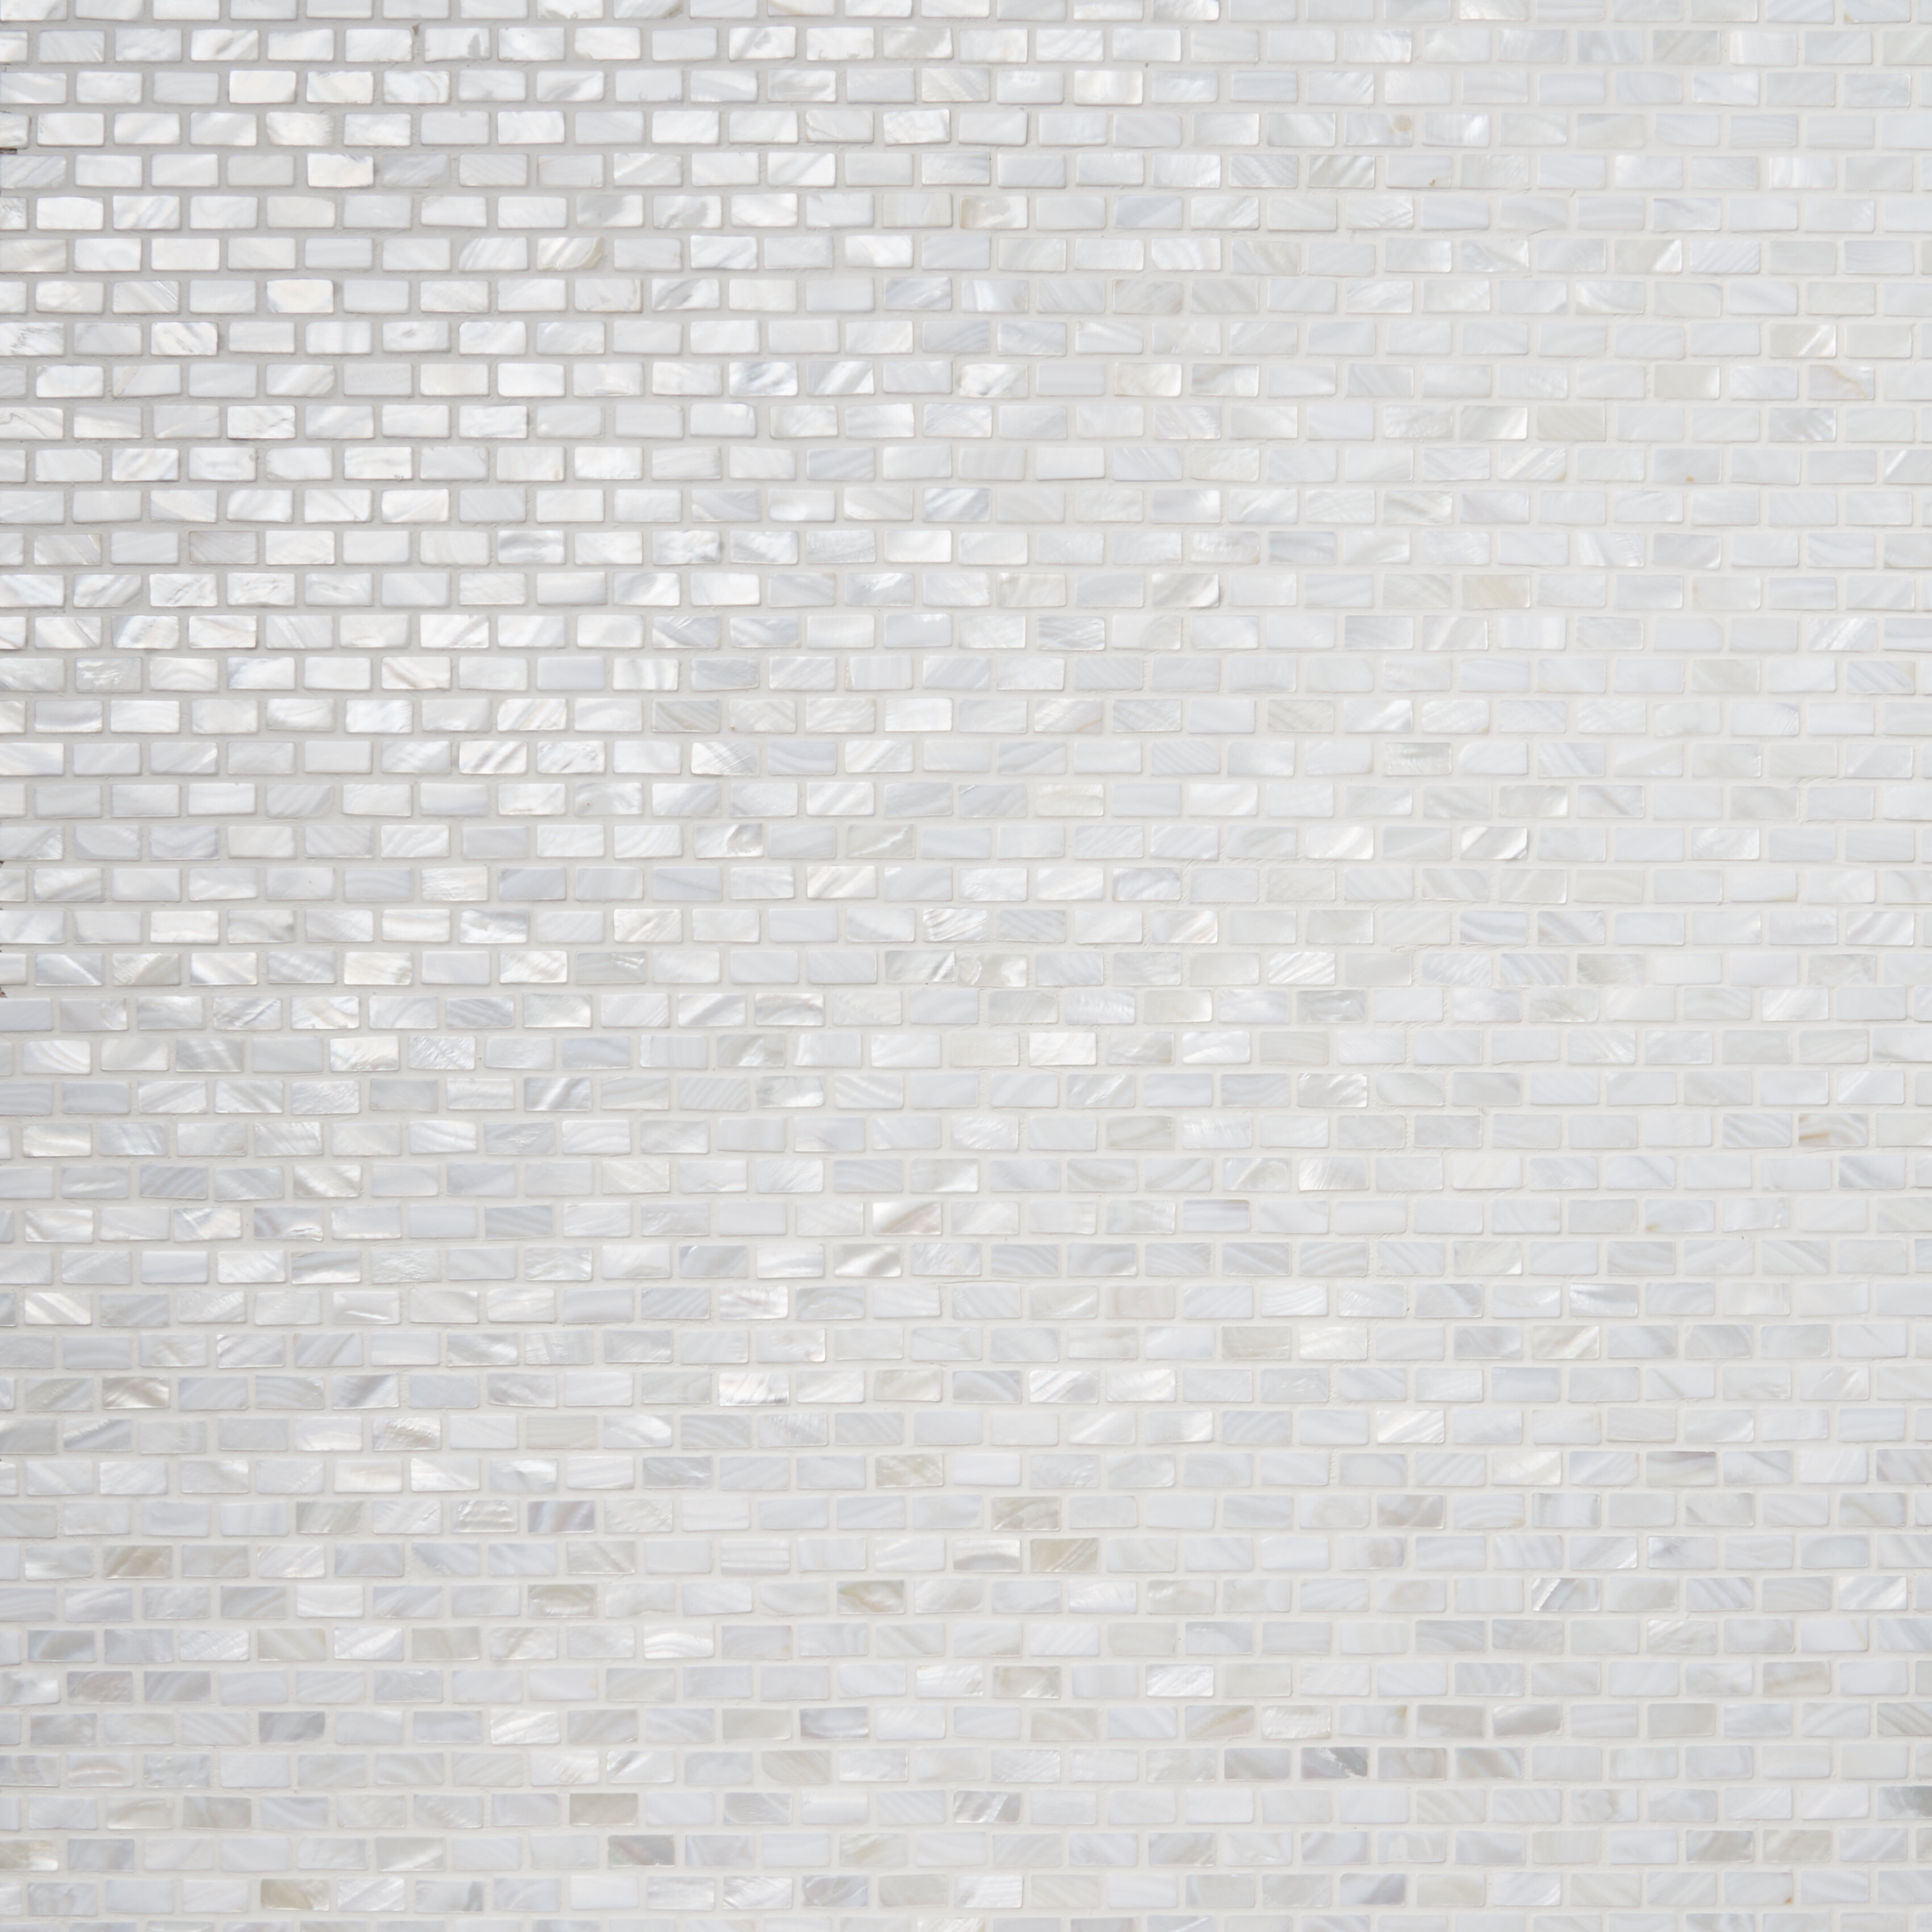 Sample - Donegal Glass Pearl Shell Mosaic Tile in Gray